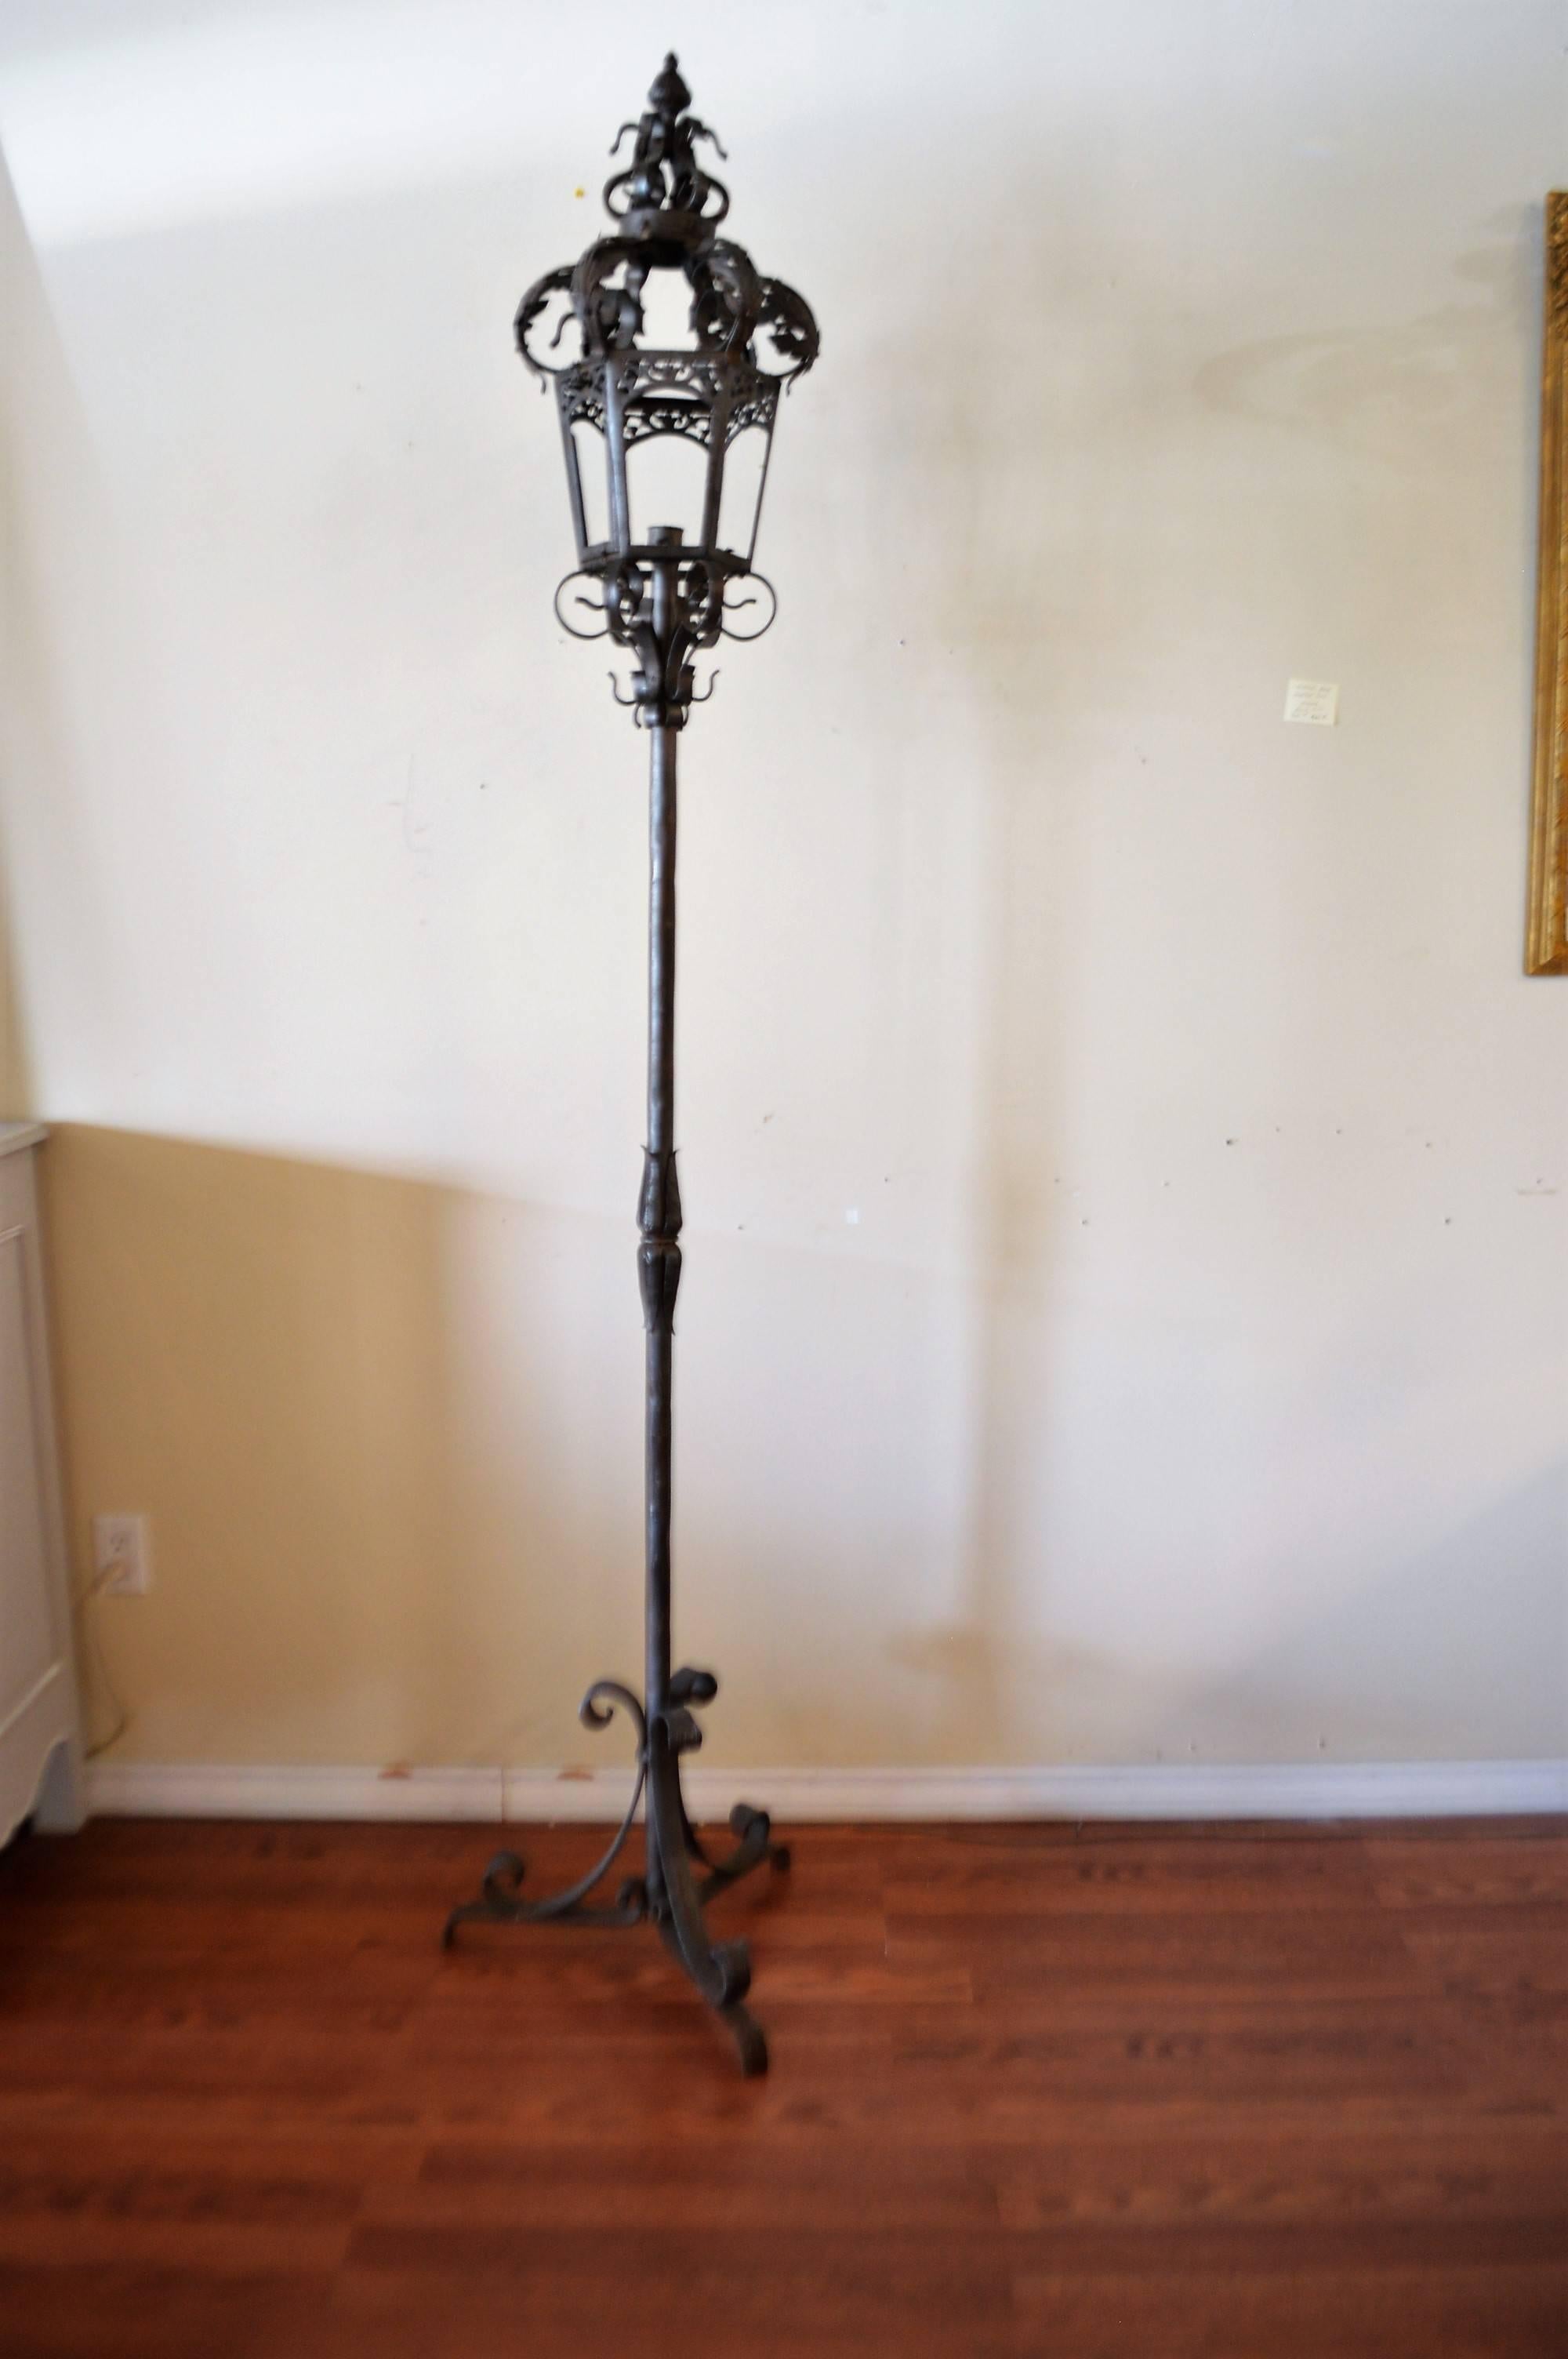 Unusual design hand-forged wrought iron floor lamp with scrolls of acanthus leaves and finial. Ornamental acanthus leaves on the middle pole and an elegant tripod base. Made for one candle but can be electrified.
Great for outdoor and can be